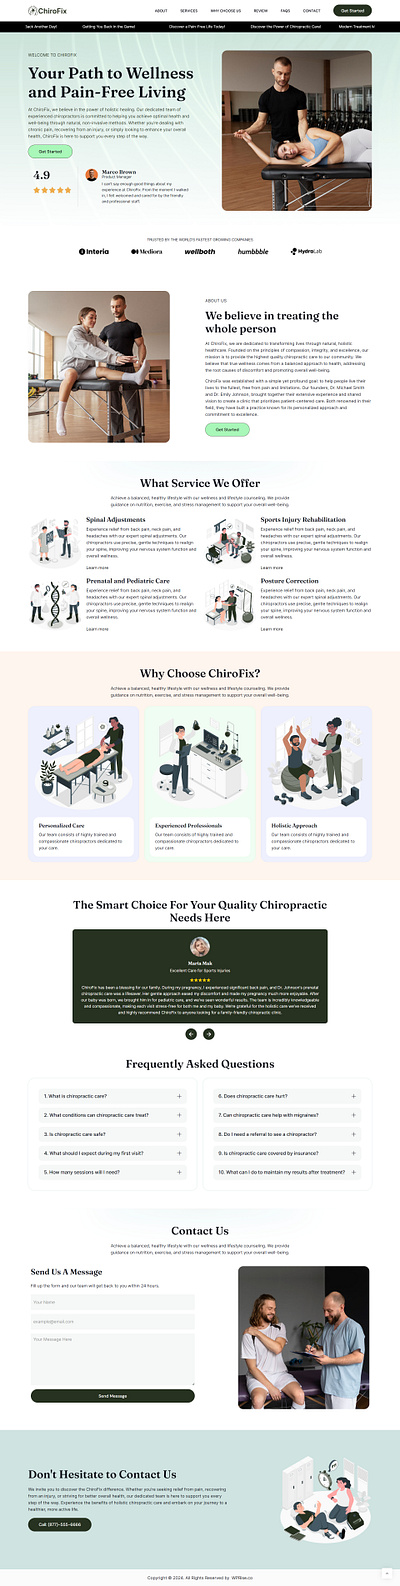 ChiroFix – Chiropractor Landing Page for Lead Generation best landing page chiropractic chiropractic landing pages chiropractic website chiropractic website design chiropractic website templates chiropractor chiropractor landing page elementor template landing page lead generation landing page